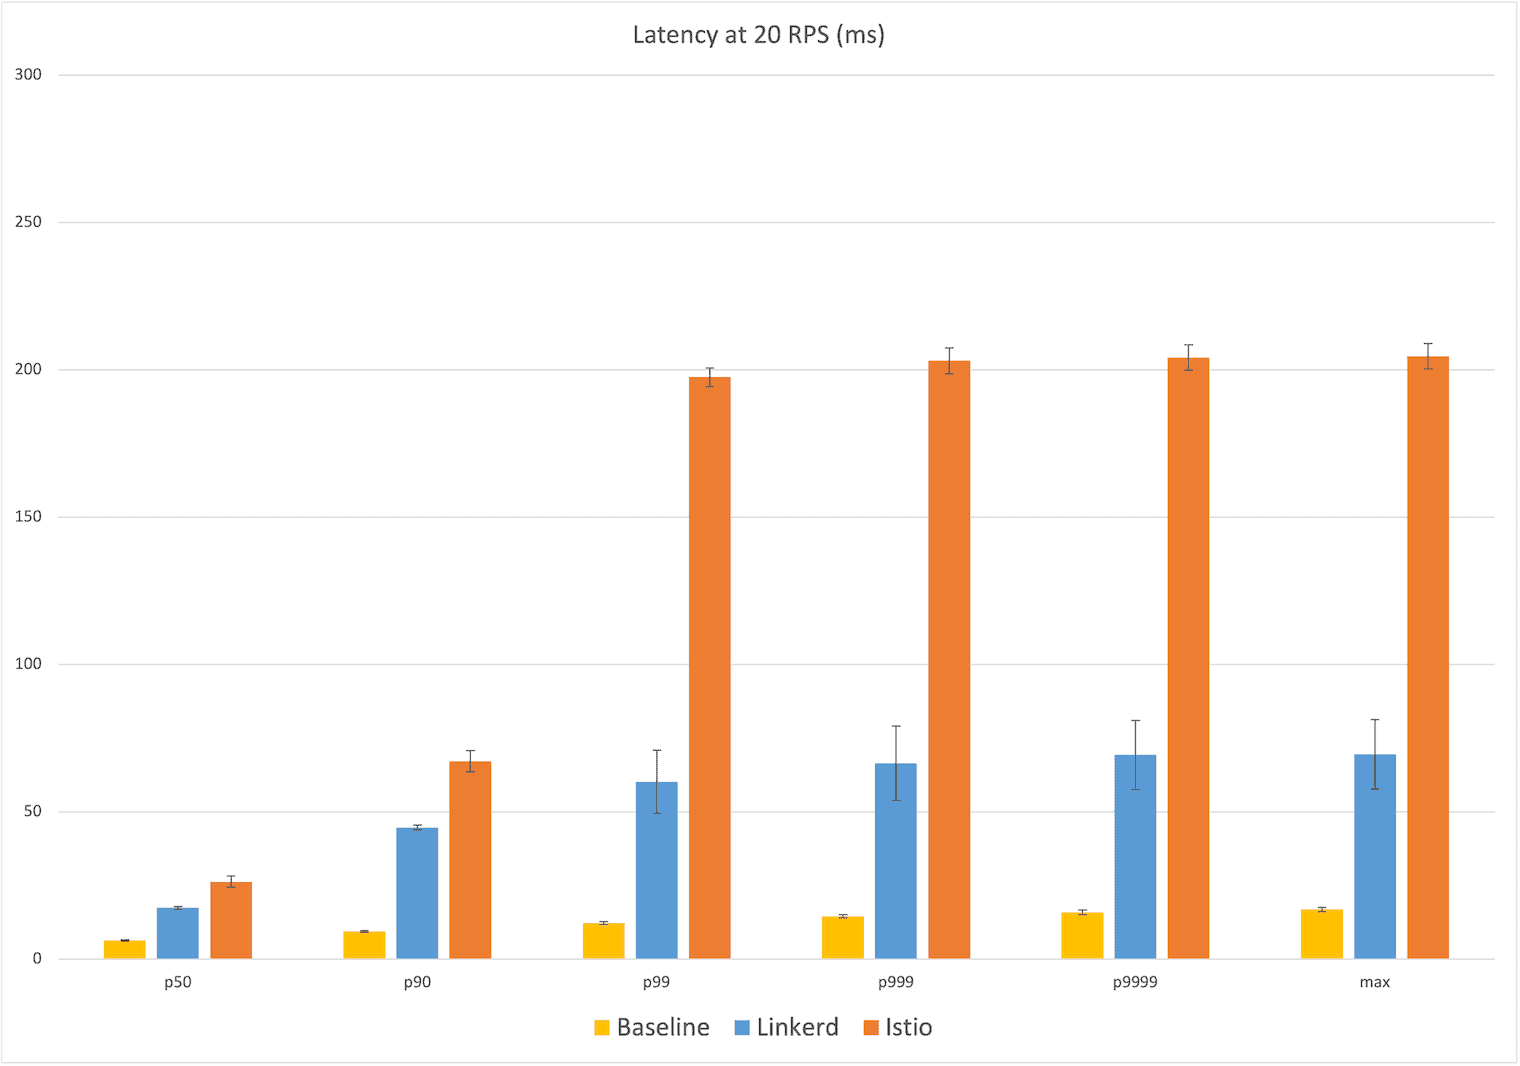 Bar chart showing comparison between baseline, Linkerd and Istio with latency at 20 RPS (ms) where Istio shows the highest number among all